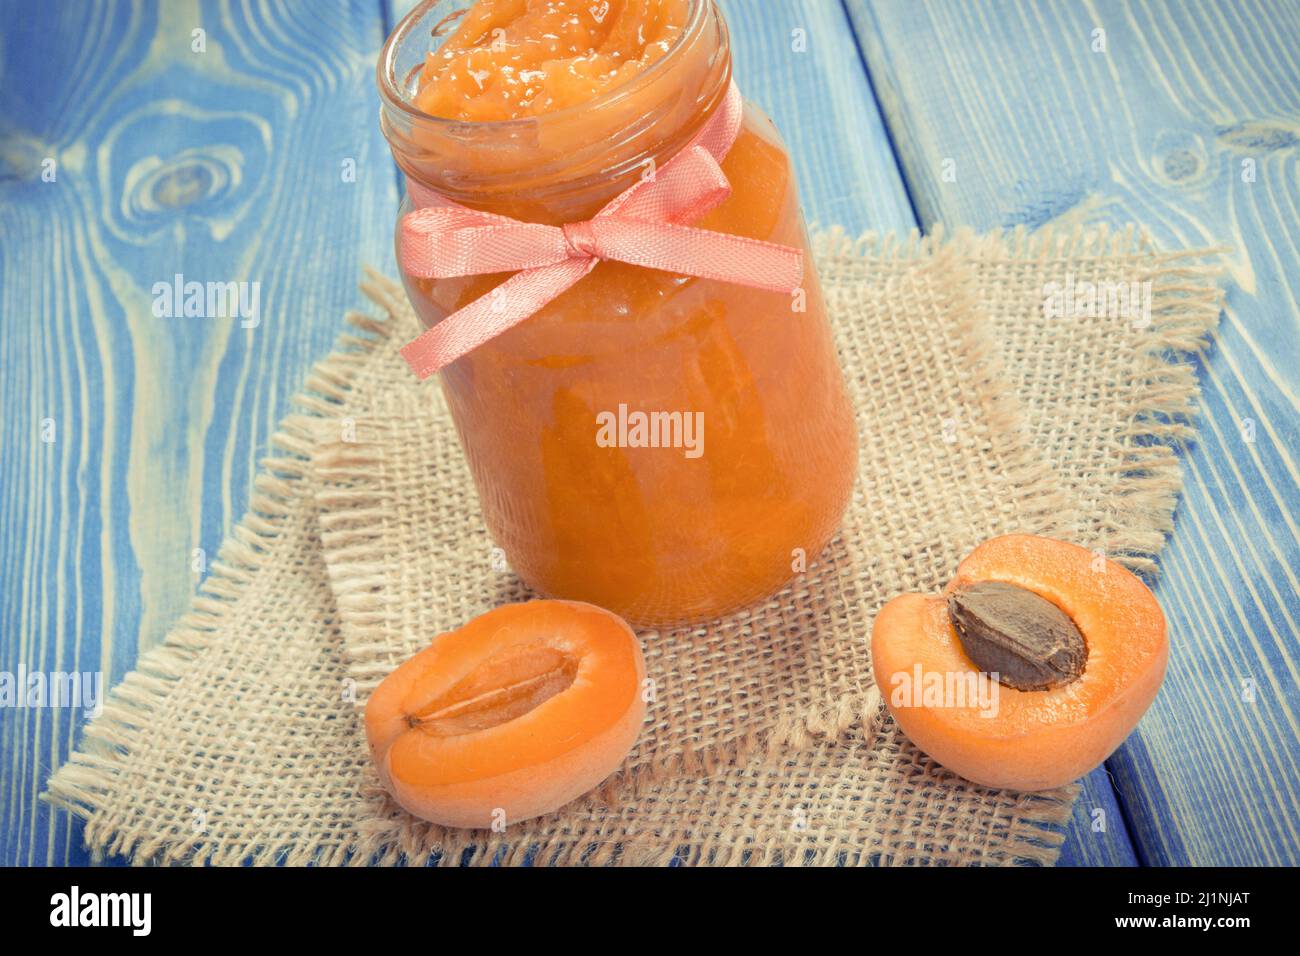 Fresh homemade apricot marmalade and ripe fruits, concept of healthy sweet dessert Stock Photo